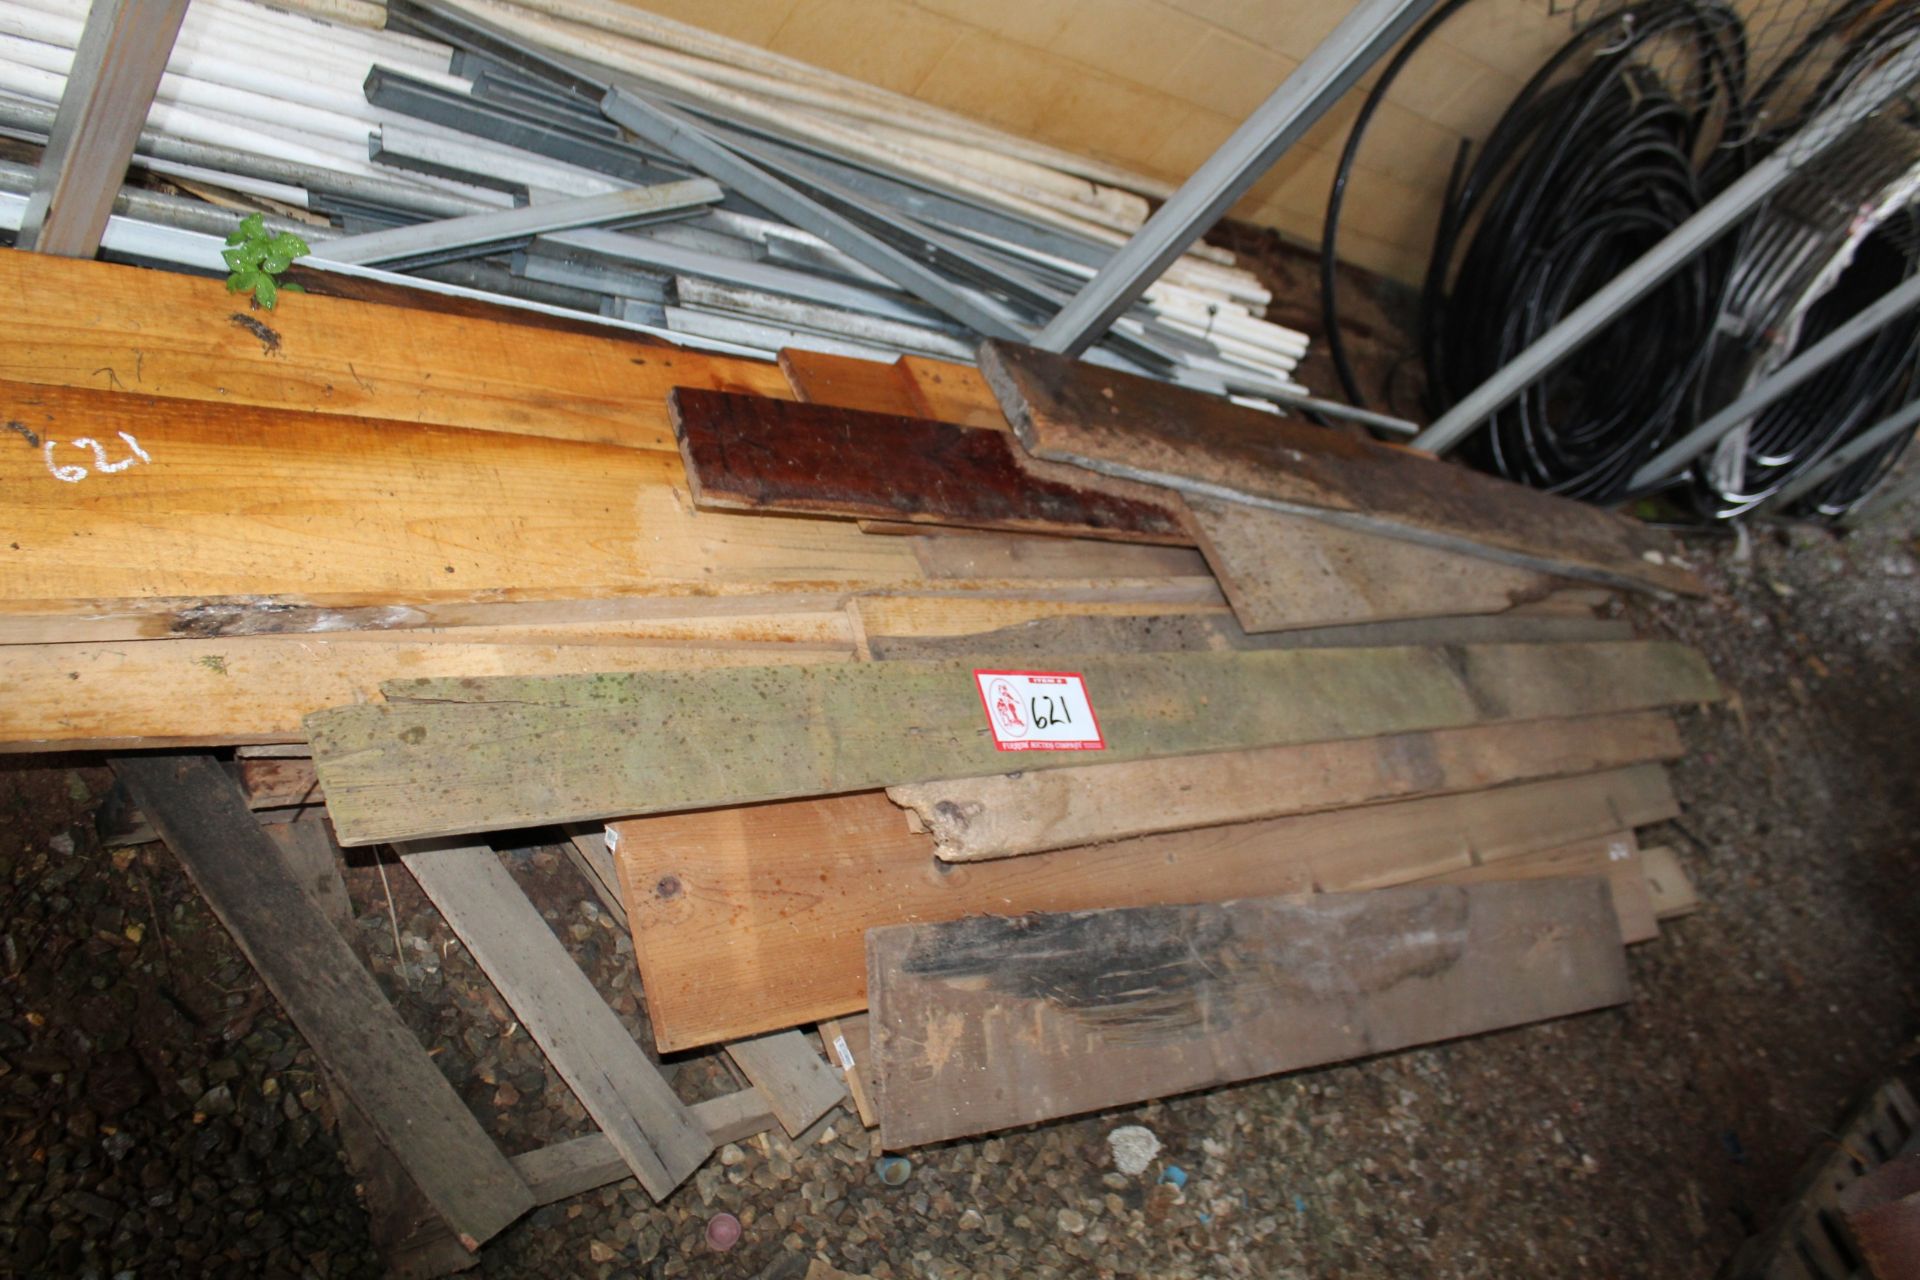 Contents of Pallet- Misc. Lumber